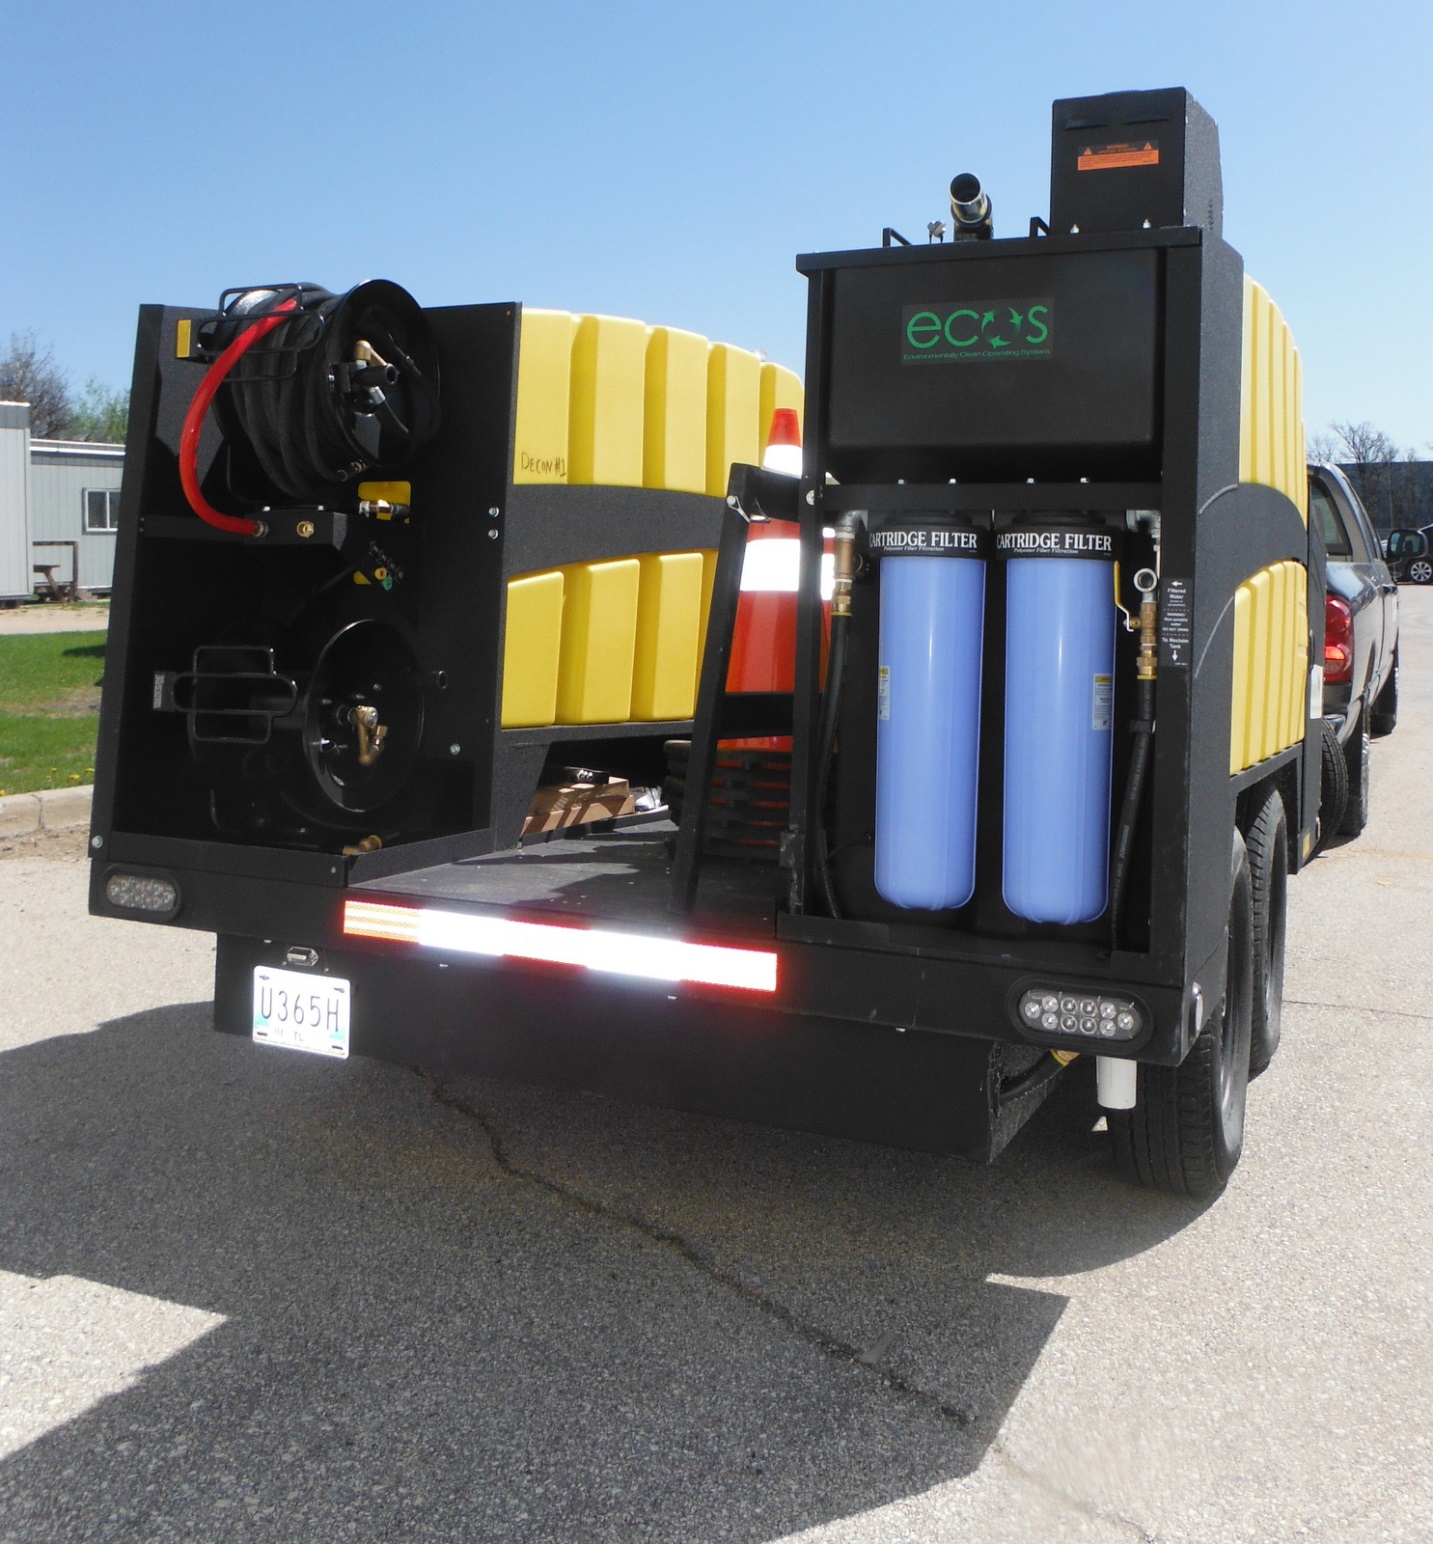 A decontamination unit being used on Lake Winnipeg. Credit: Manitoba Department of Conservation and Stewardship.